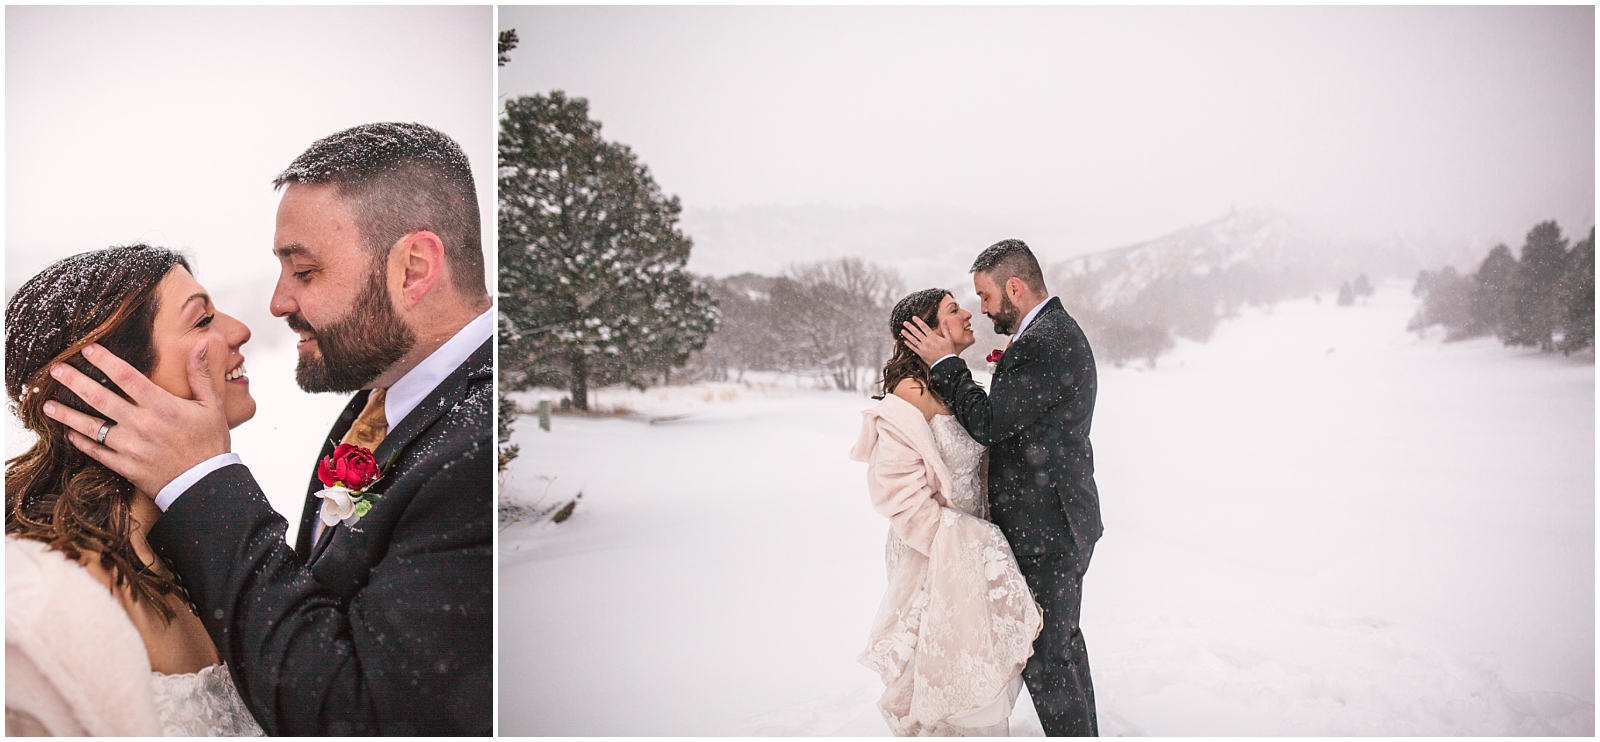 Romantic bride and groom portraits in the snow for winter wedding at Arrowhead Golf Club